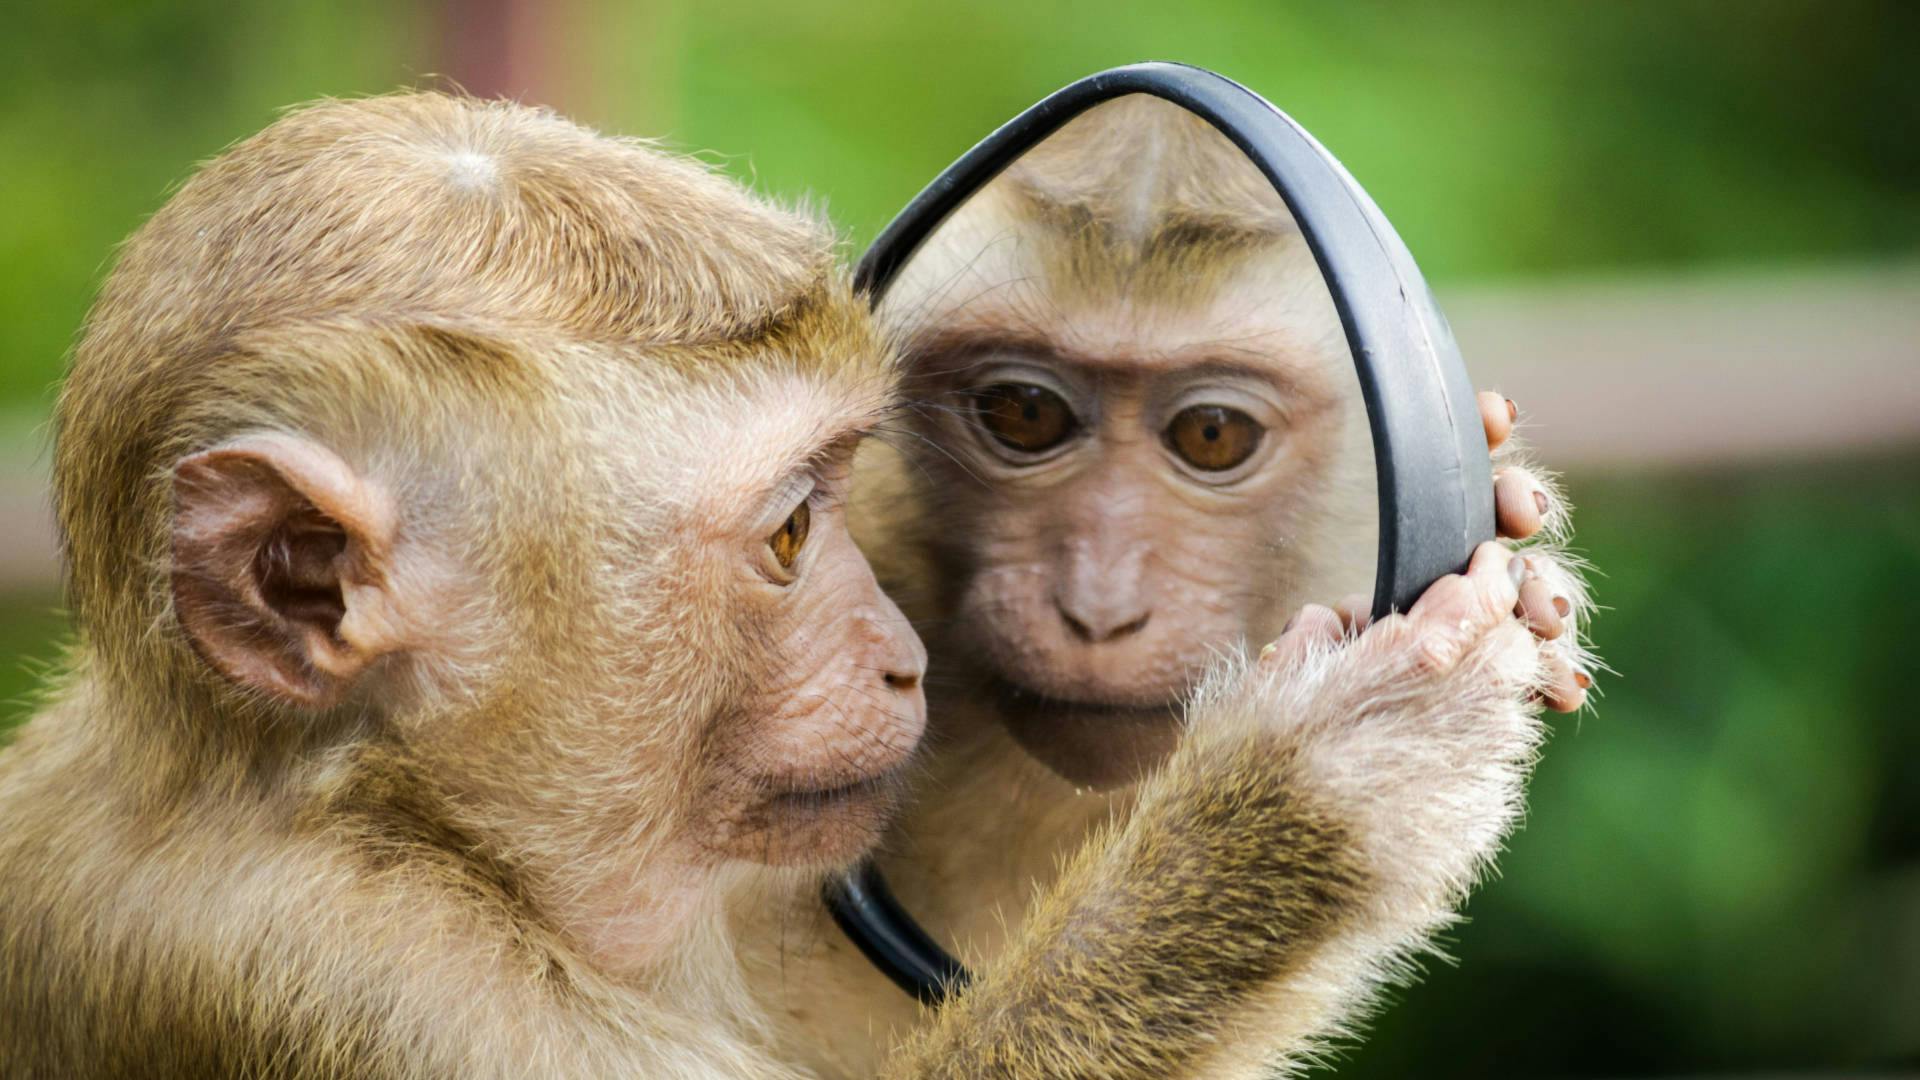 A small white monkey looking at itself in a mirror